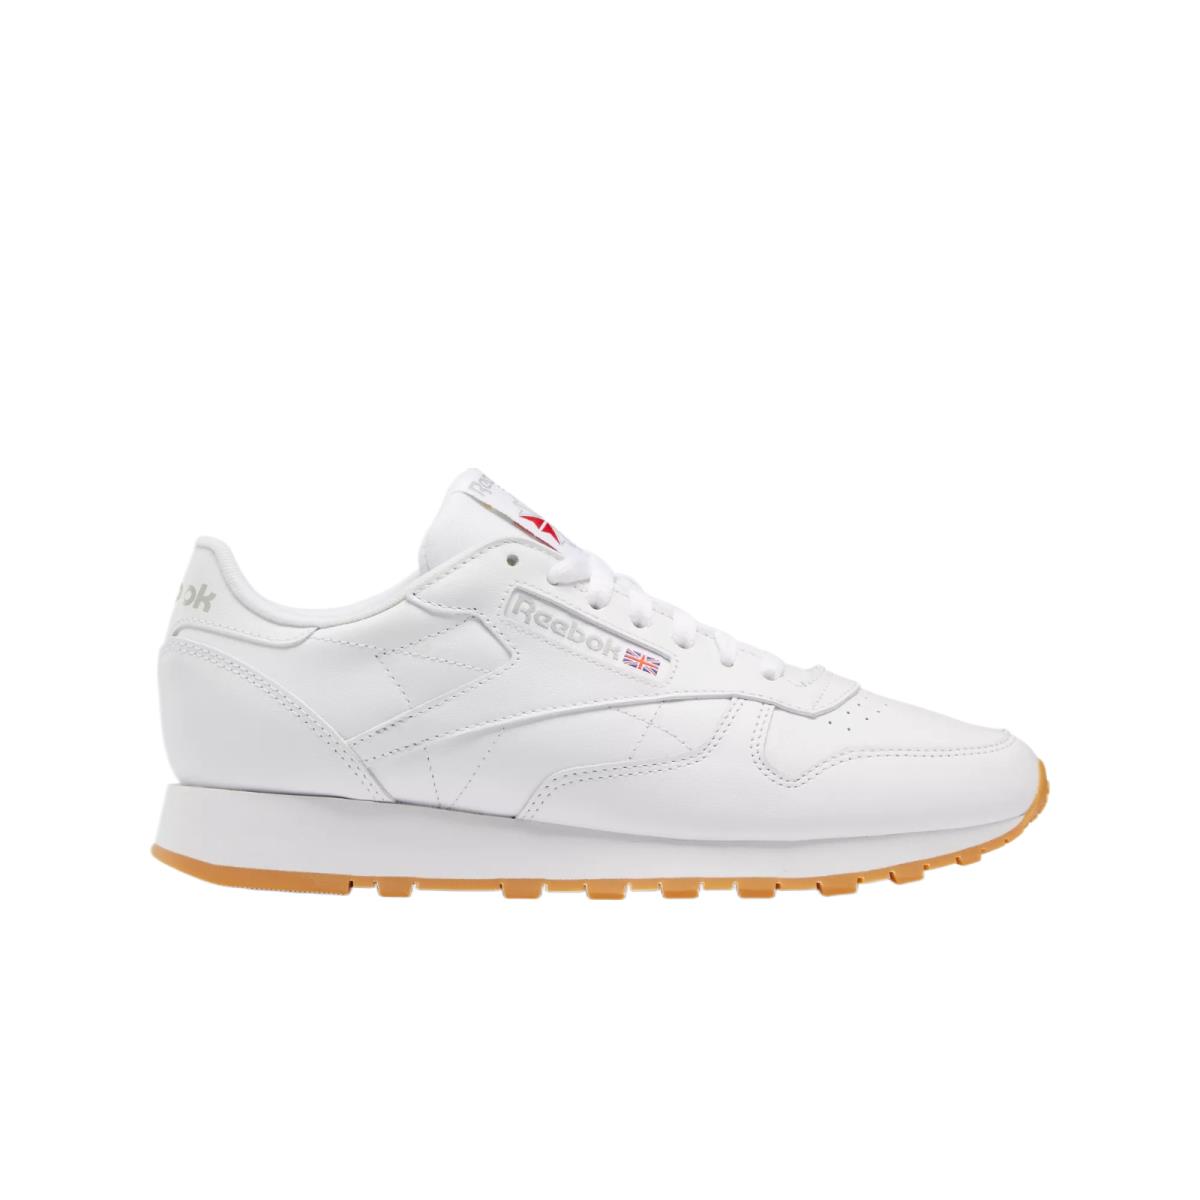 Reebok Adult Unisex Classic Leather Shoes White/gum 49797 / GY0952